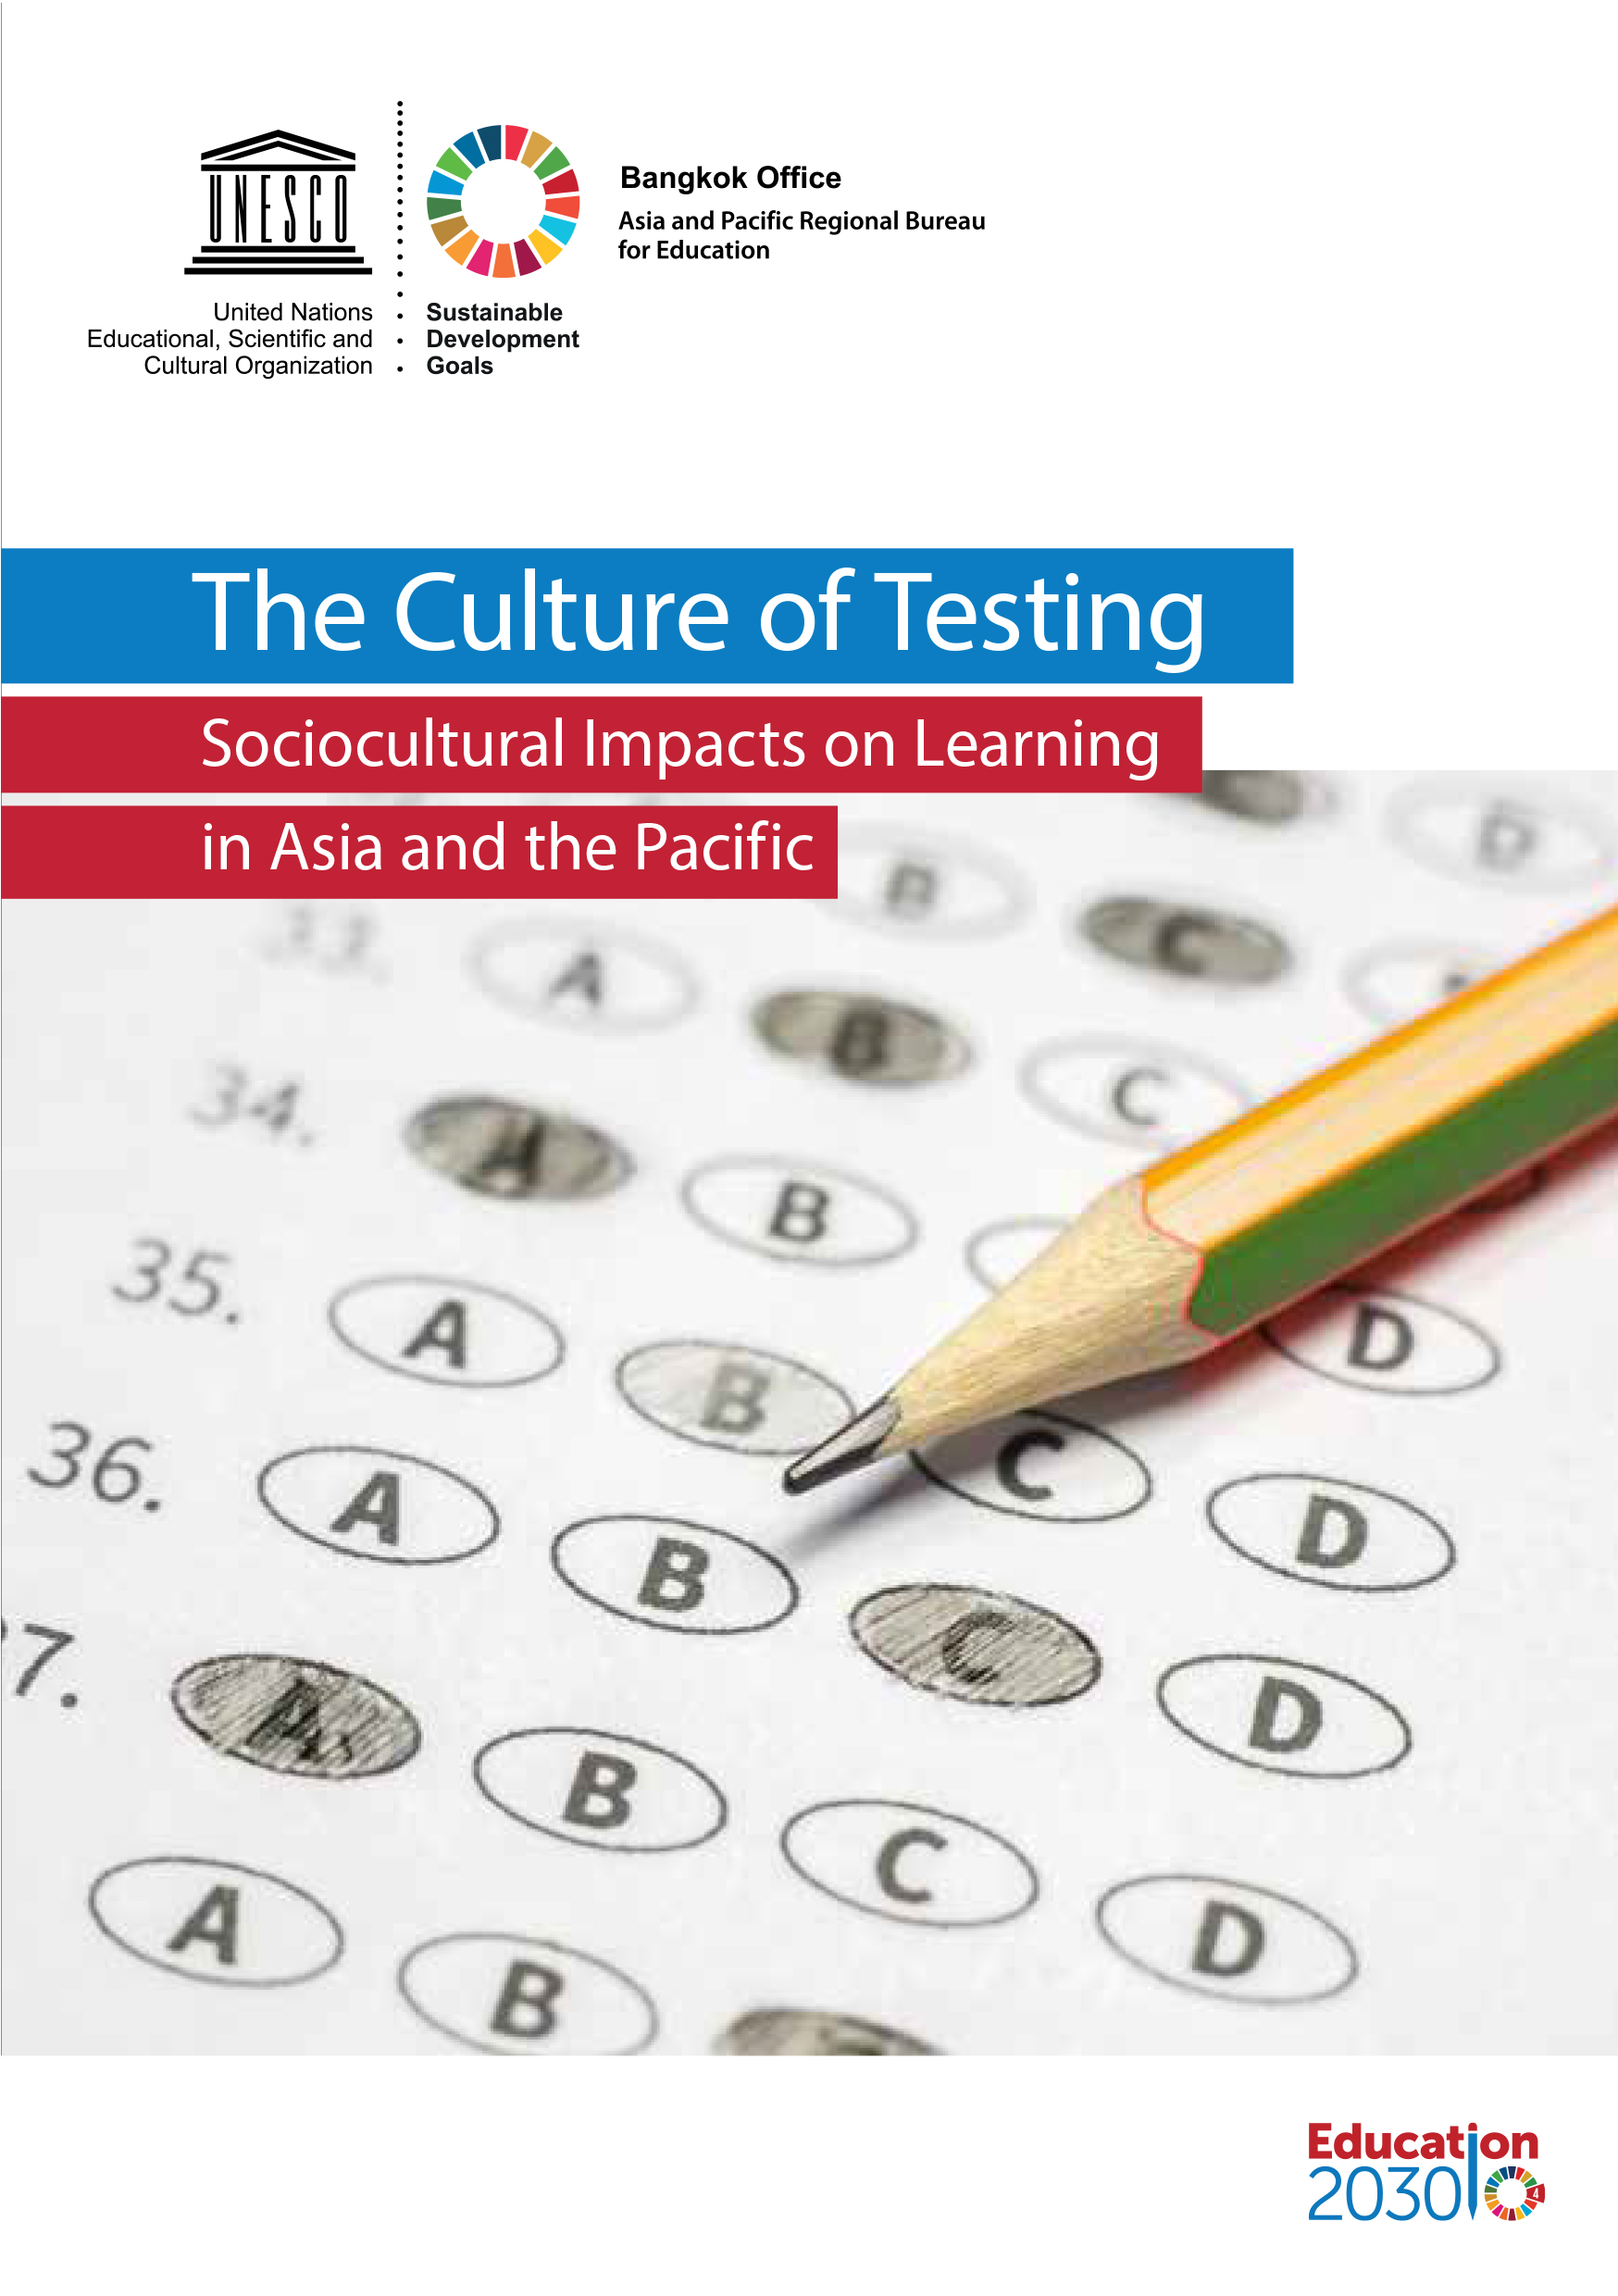 The Culture of Testing: Sociocultural Impacts on Learning in Asia and the Pacific 